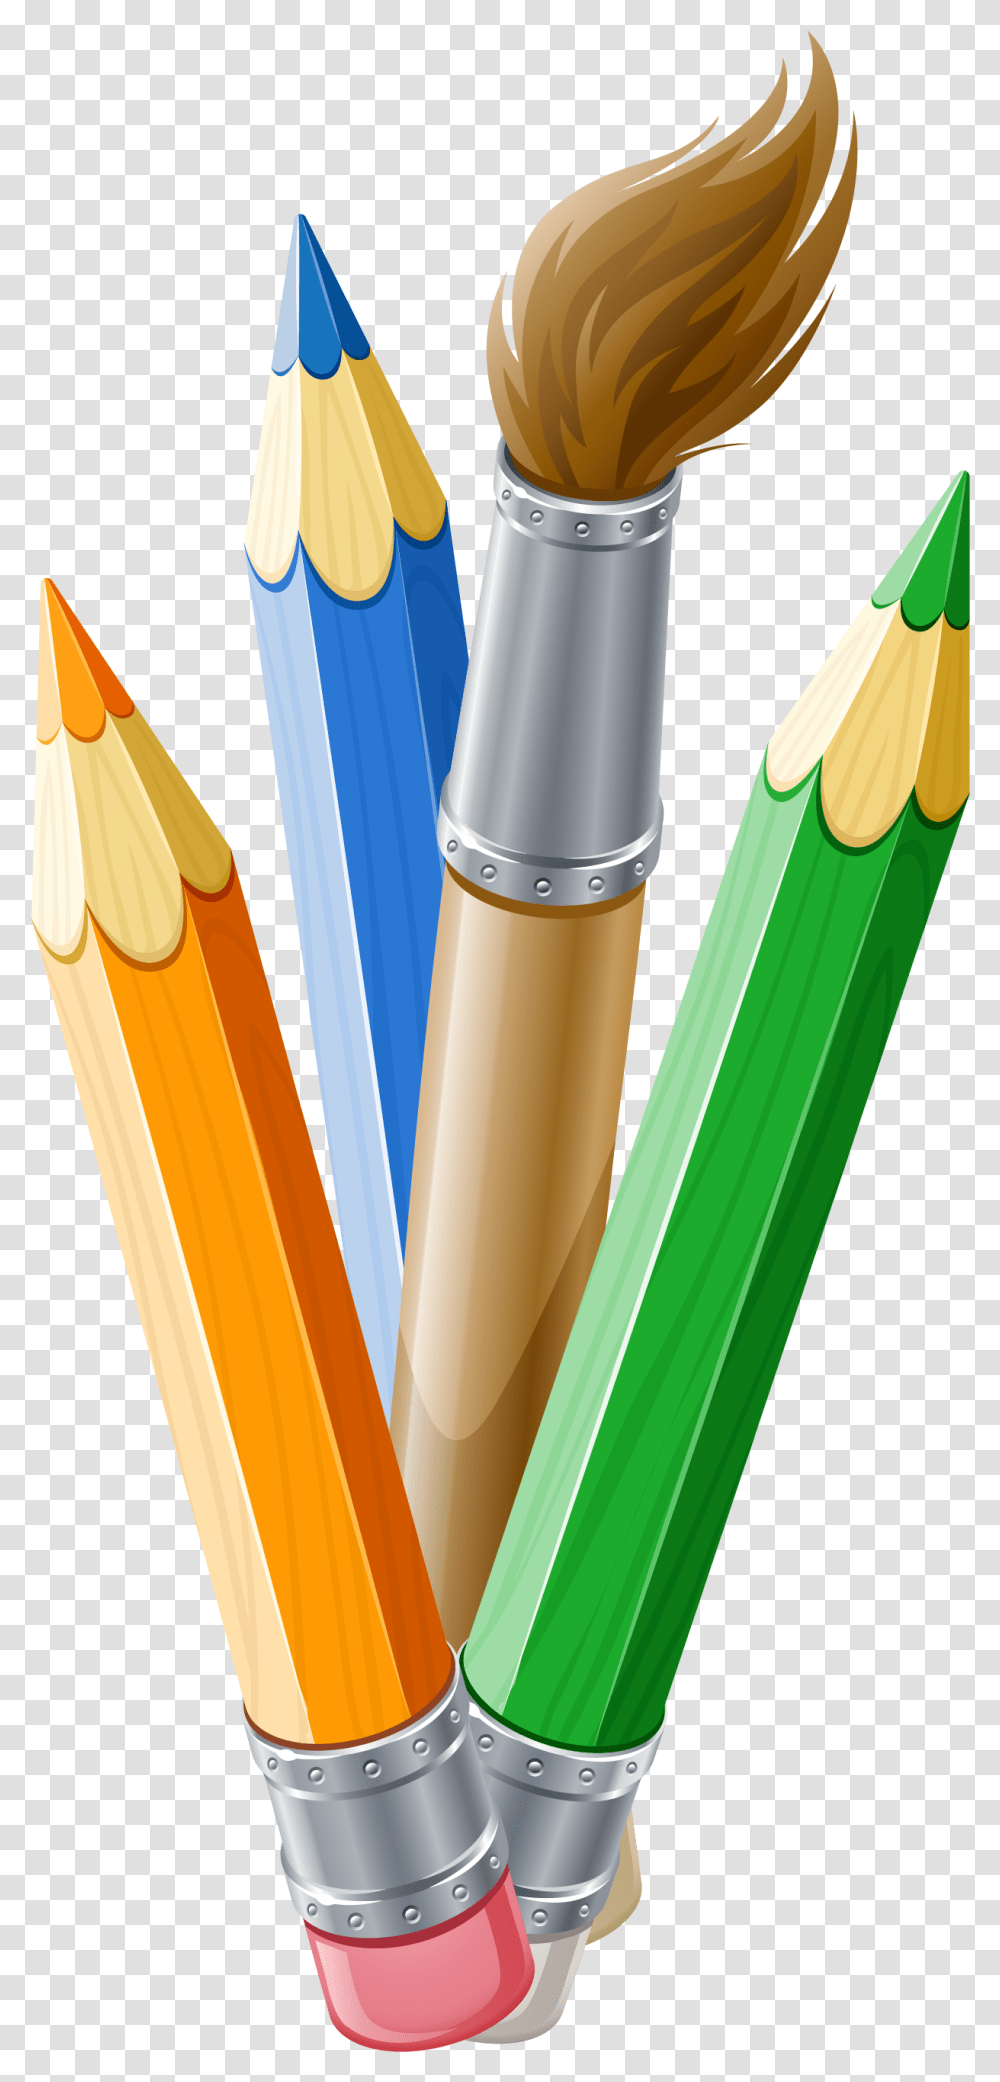 Paint Brush Pen Pencil Related To Paint Brush Transparent Png